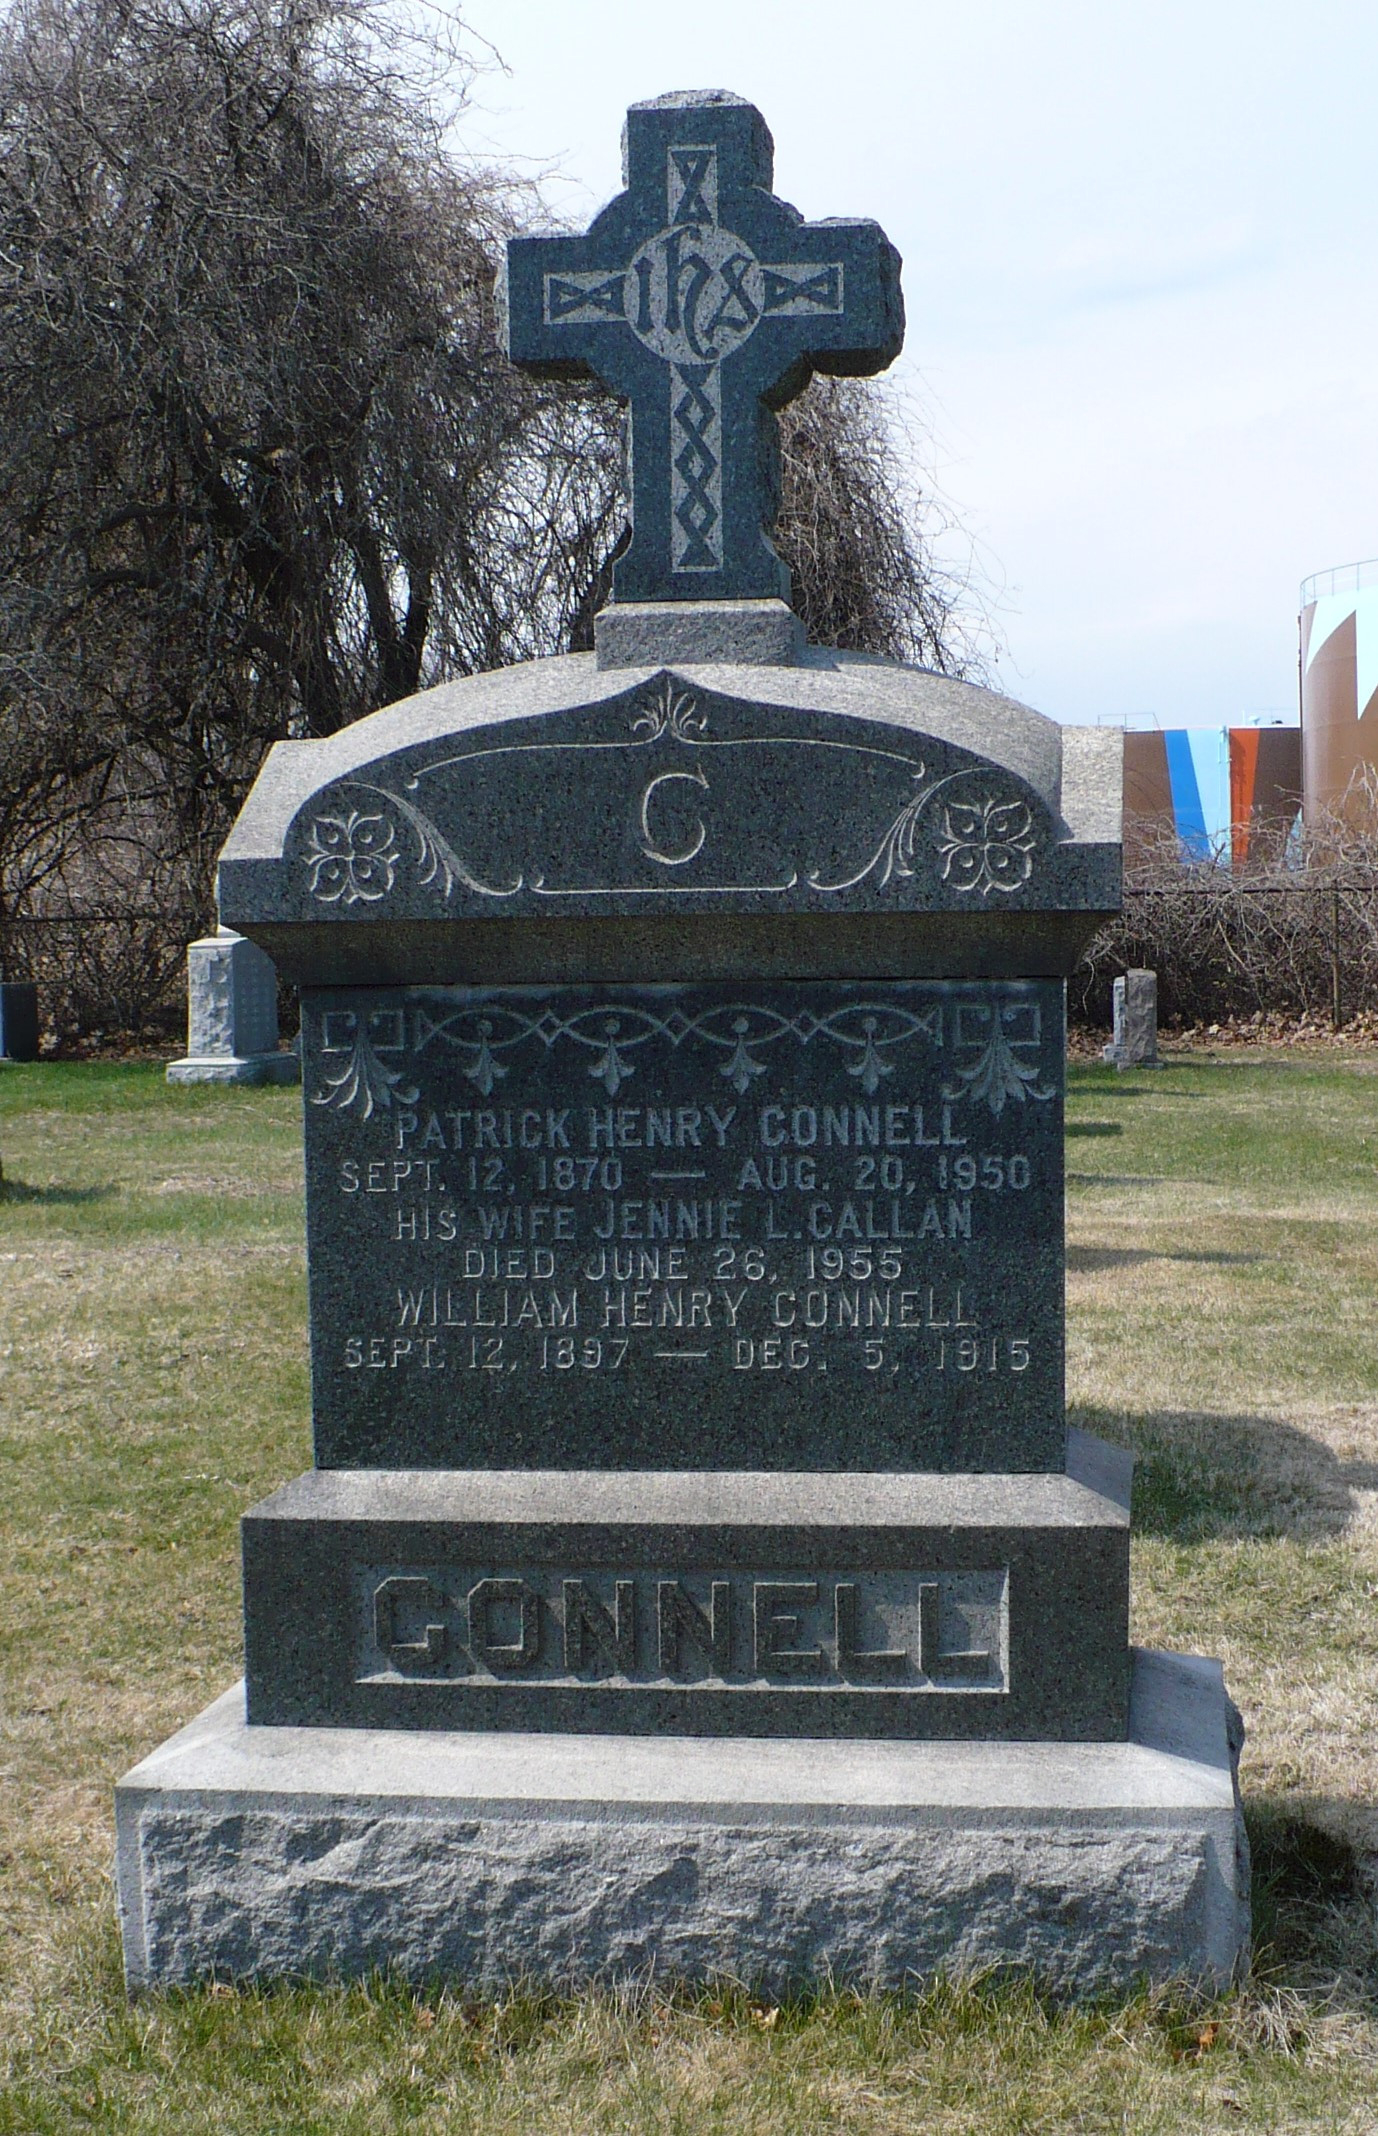 Patrick Henry Connell gravestone front